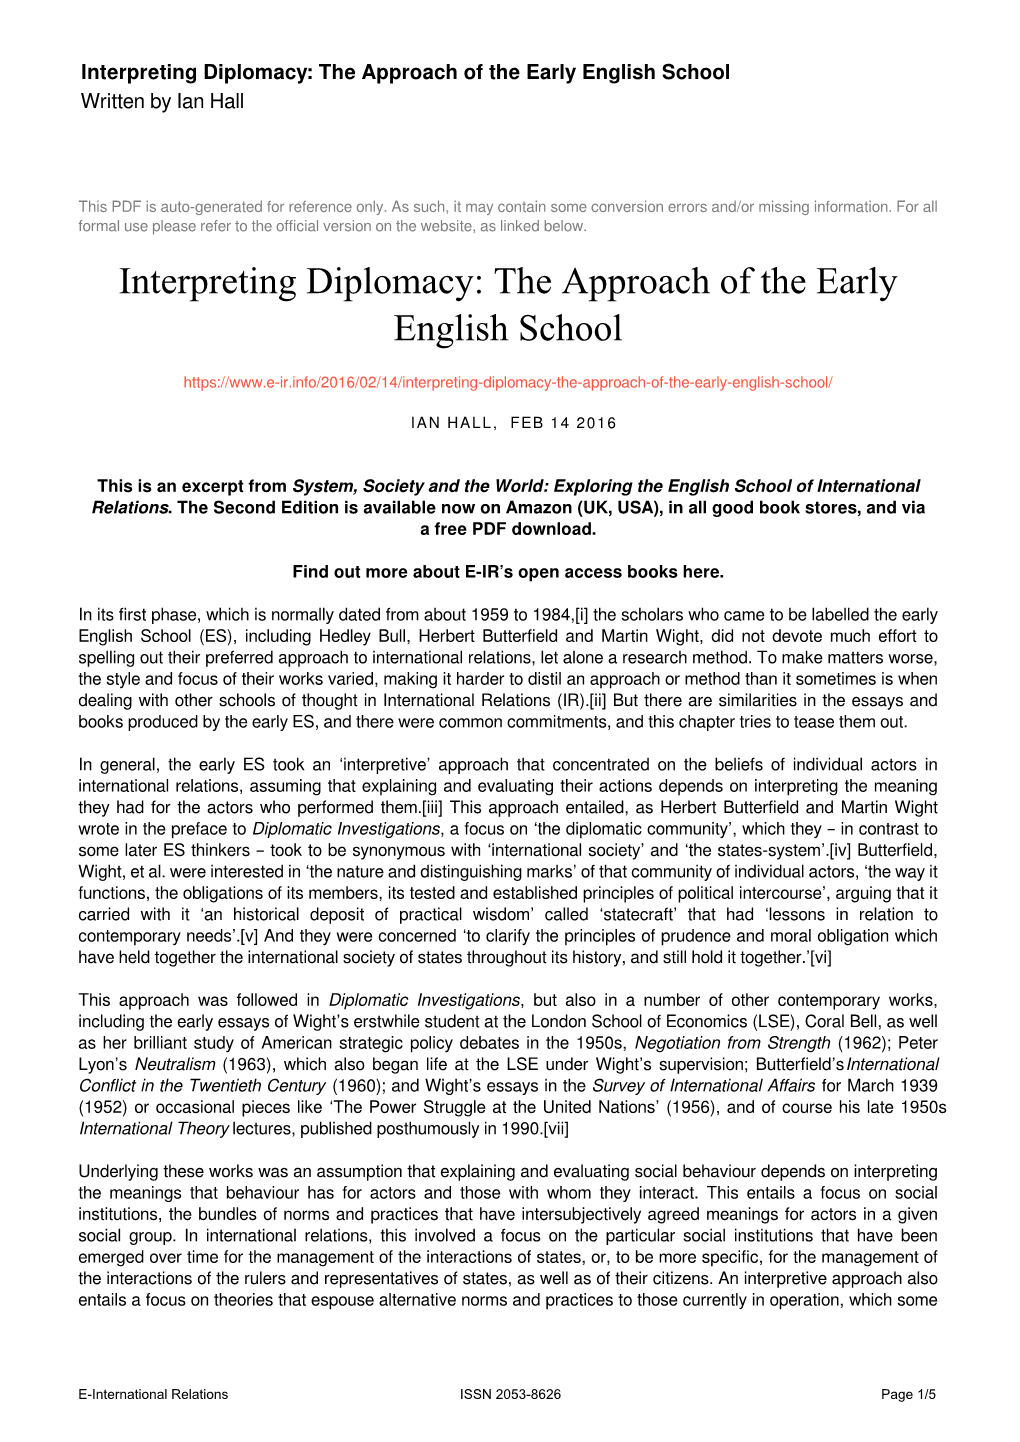 Interpreting Diplomacy: the Approach of the Early English School Written by Ian Hall